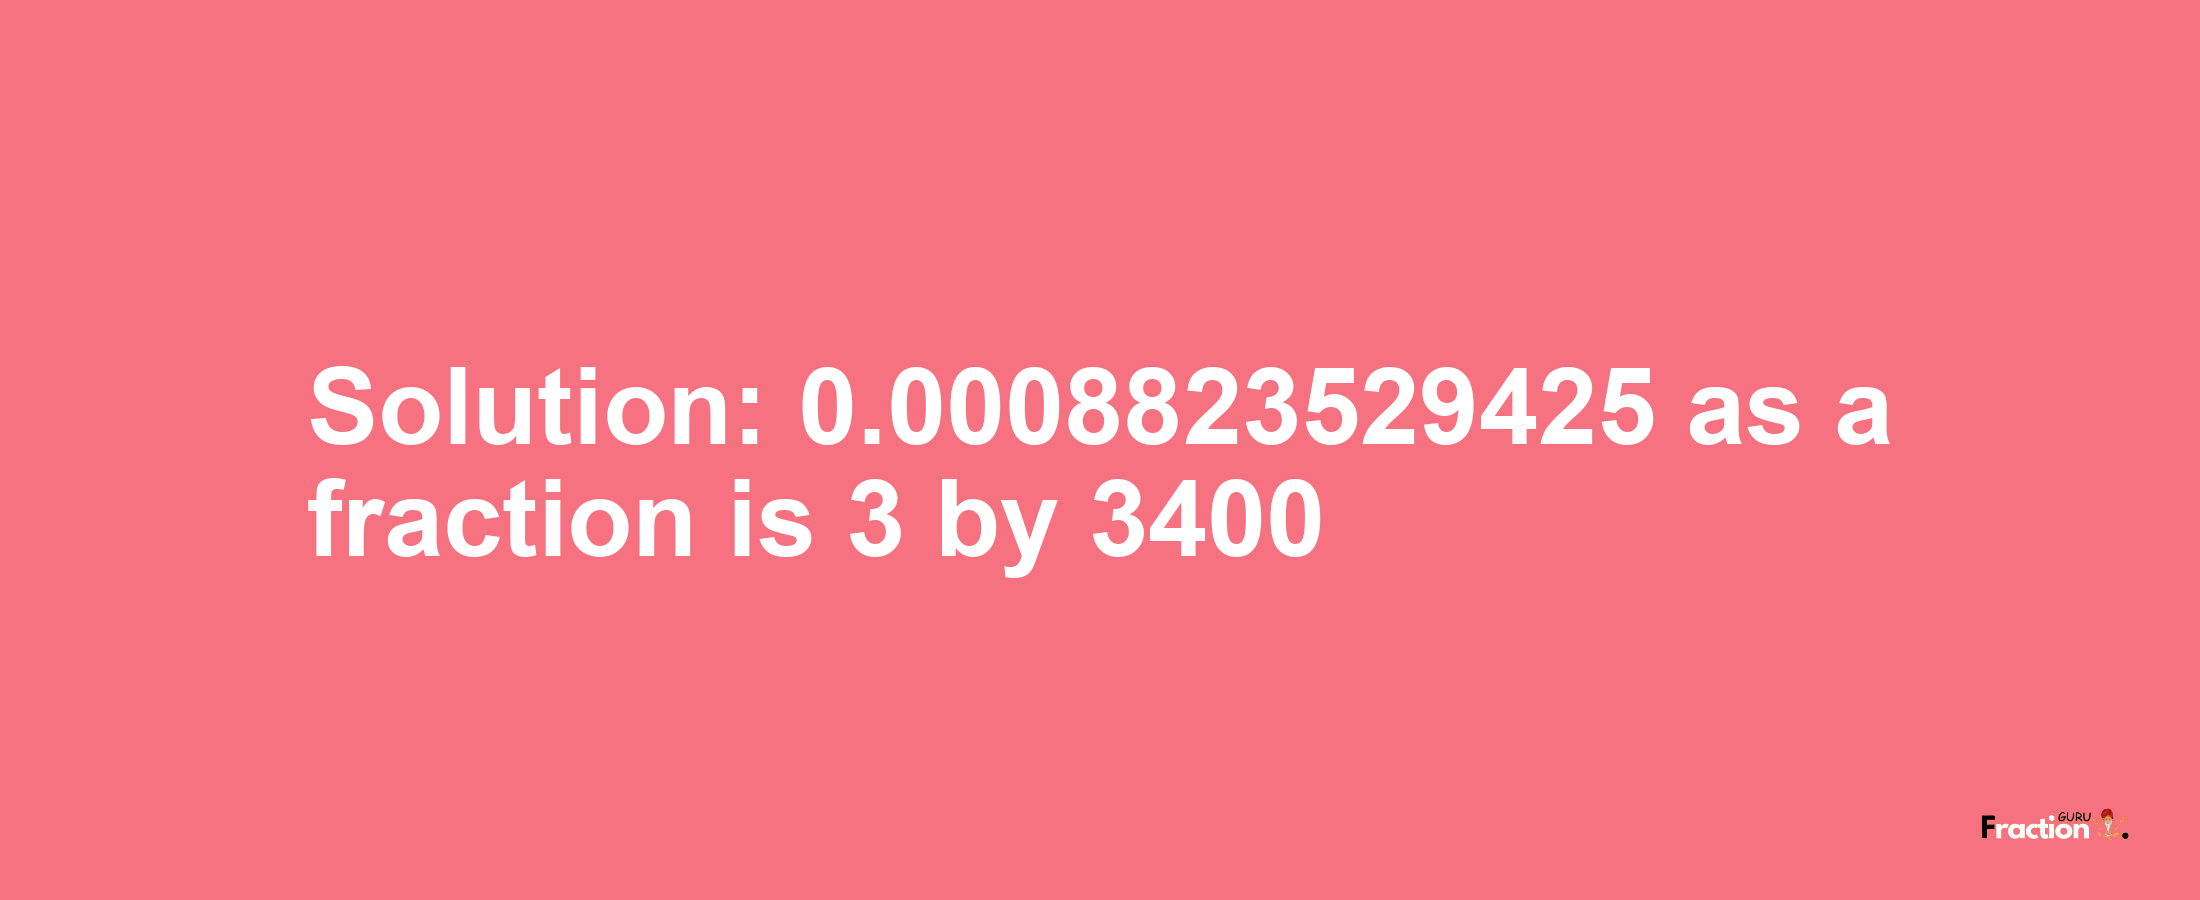 Solution:0.0008823529425 as a fraction is 3/3400